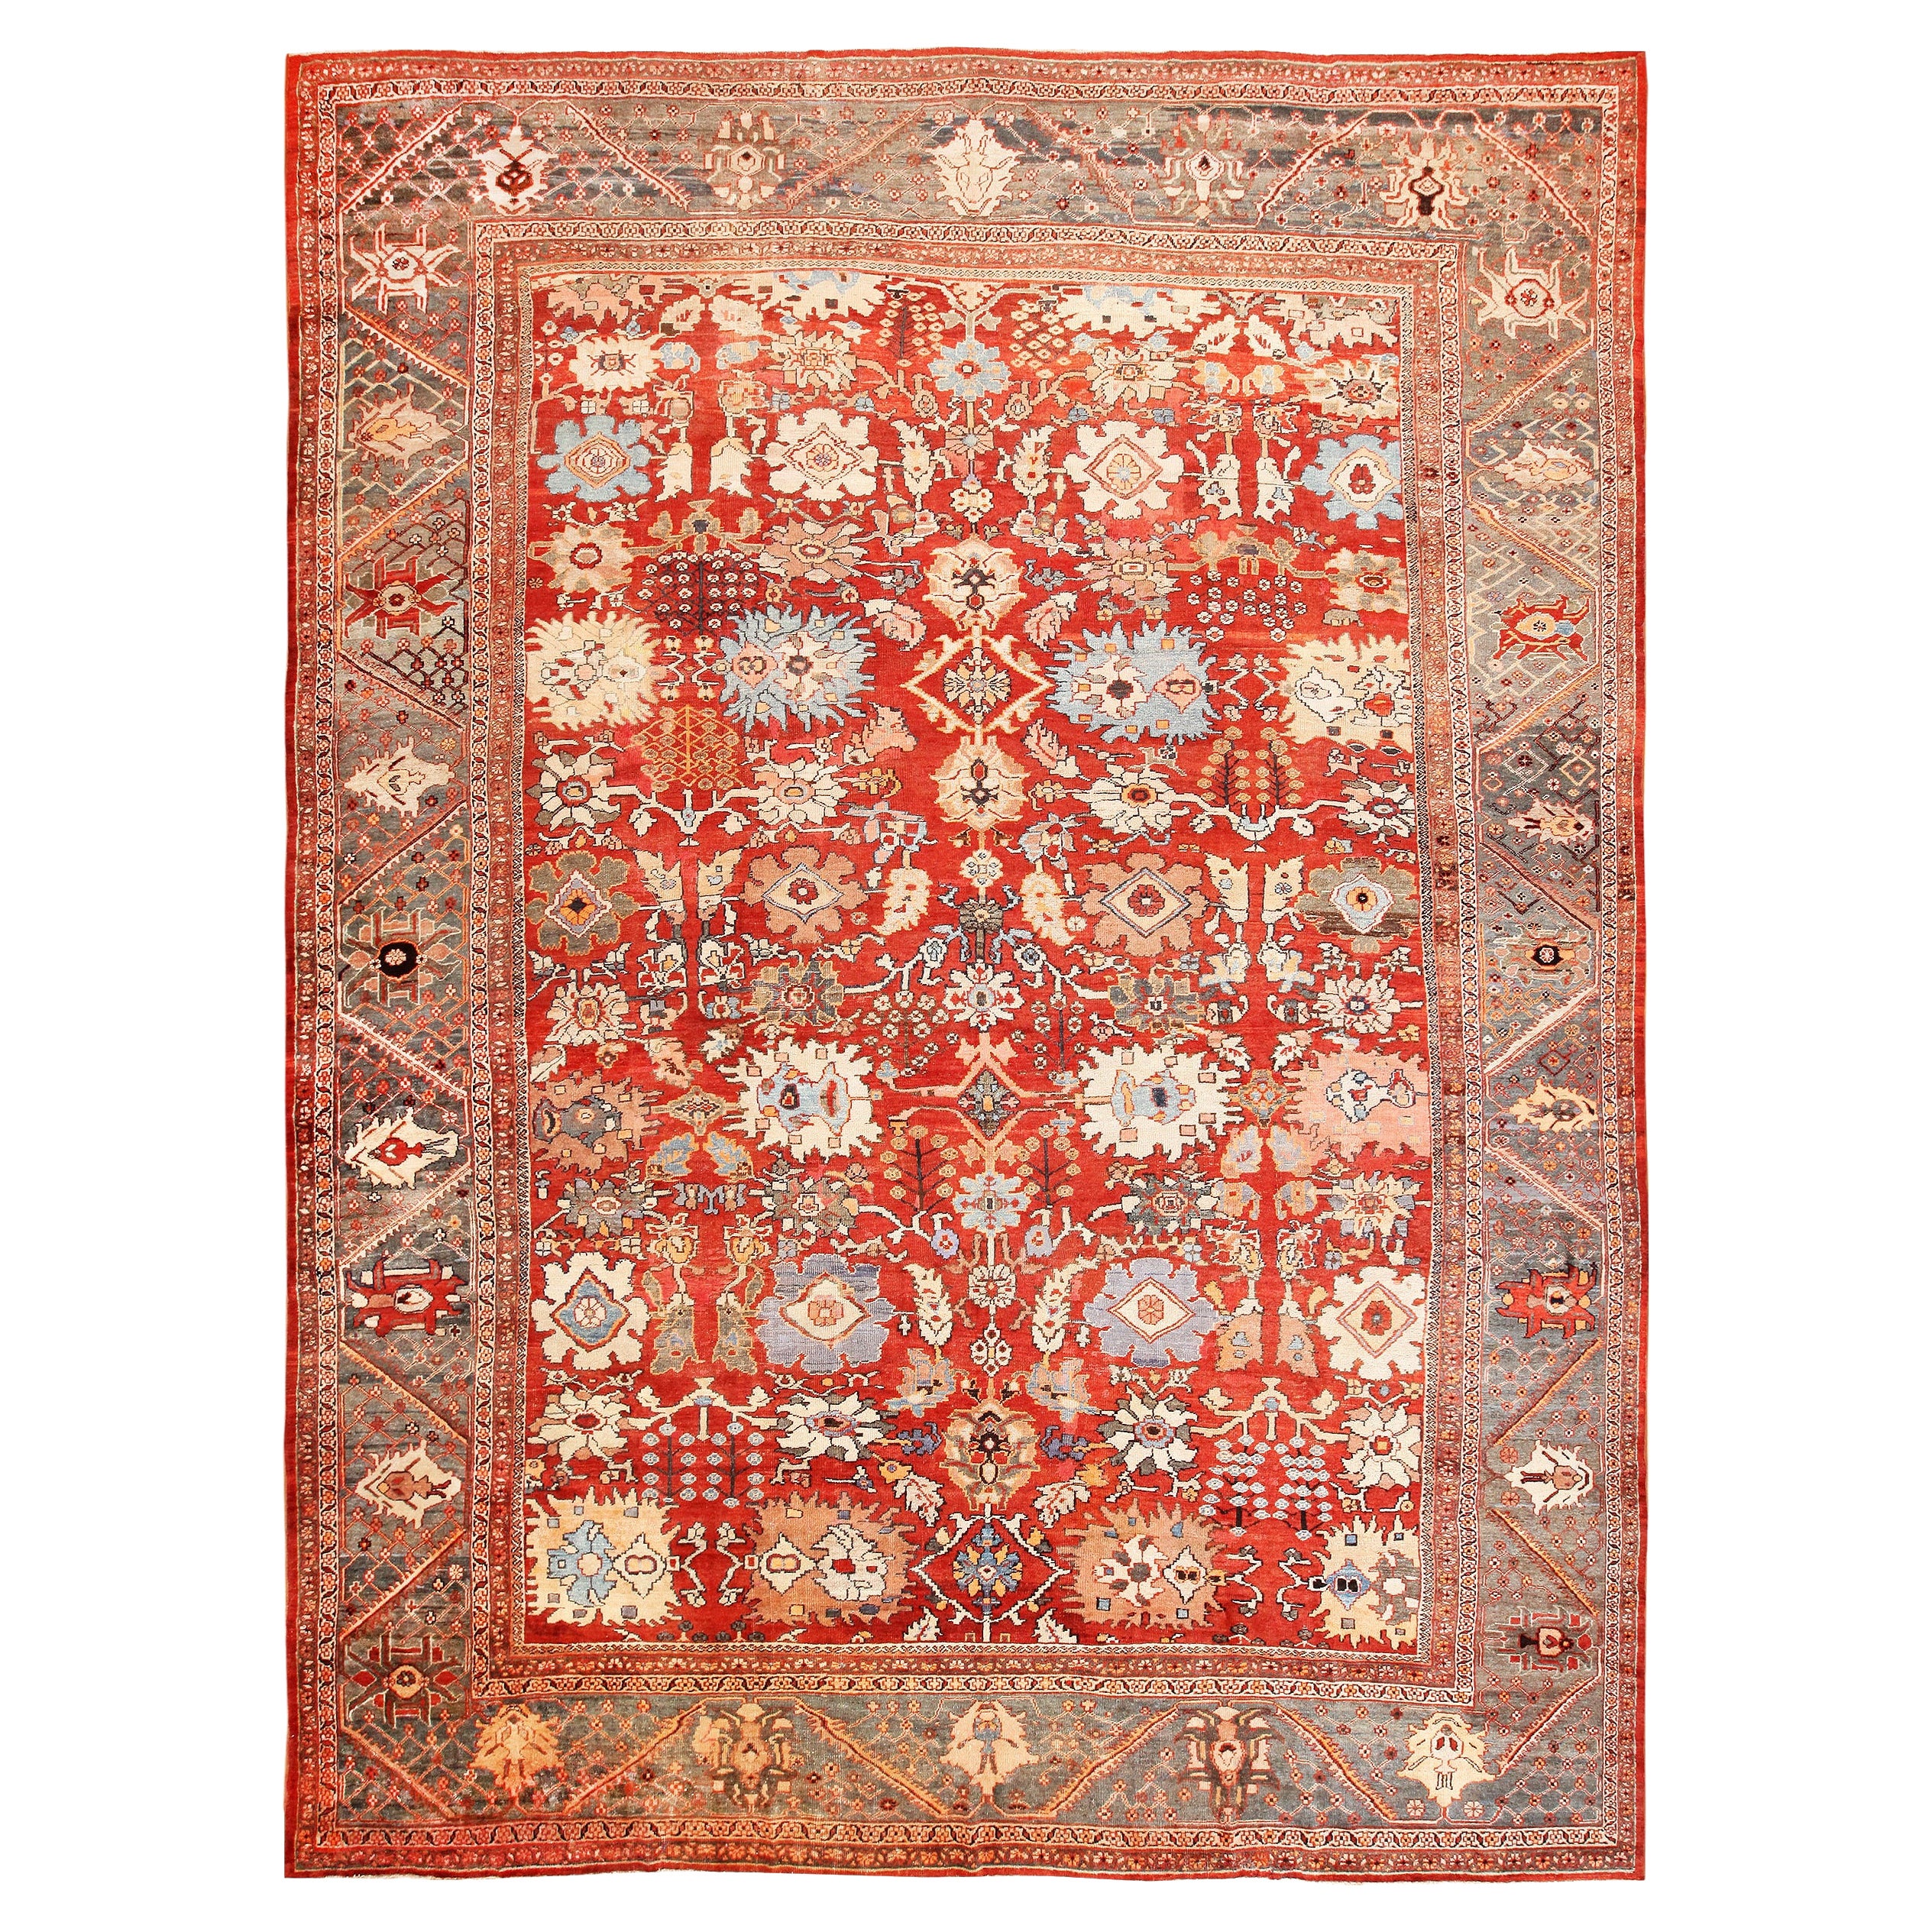 Antique Persian Sultanabad Rug. 14 ft 4 in x 19 ft 4 in